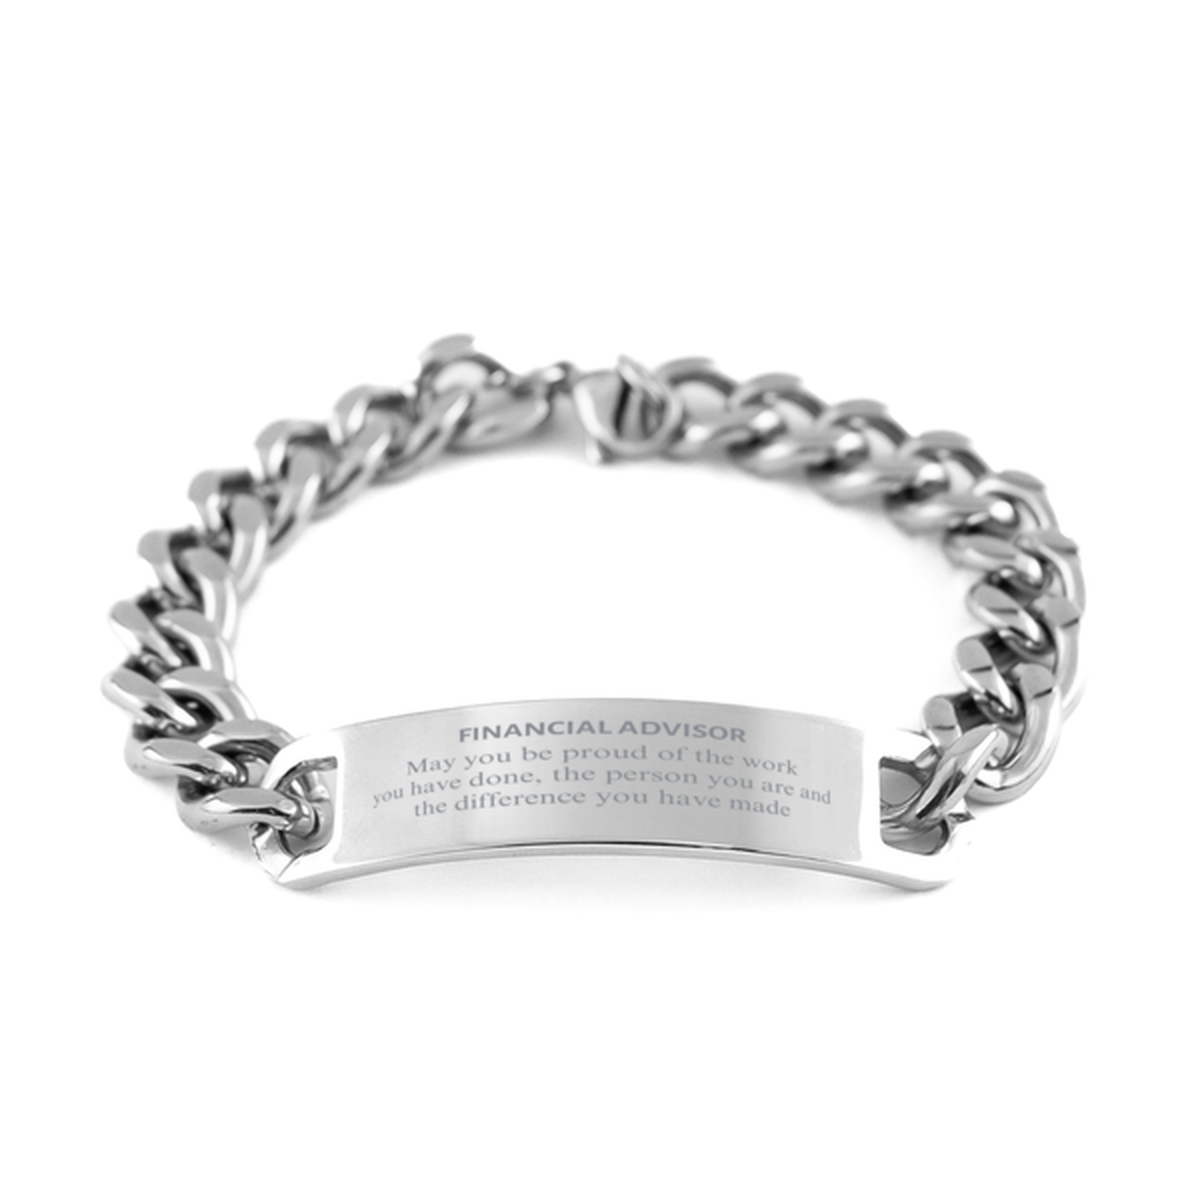 Financial Advisor May you be proud of the work you have done, Retirement Financial Advisor Cuban Chain Stainless Steel Bracelet for Colleague Appreciation Gifts Amazing for Financial Advisor